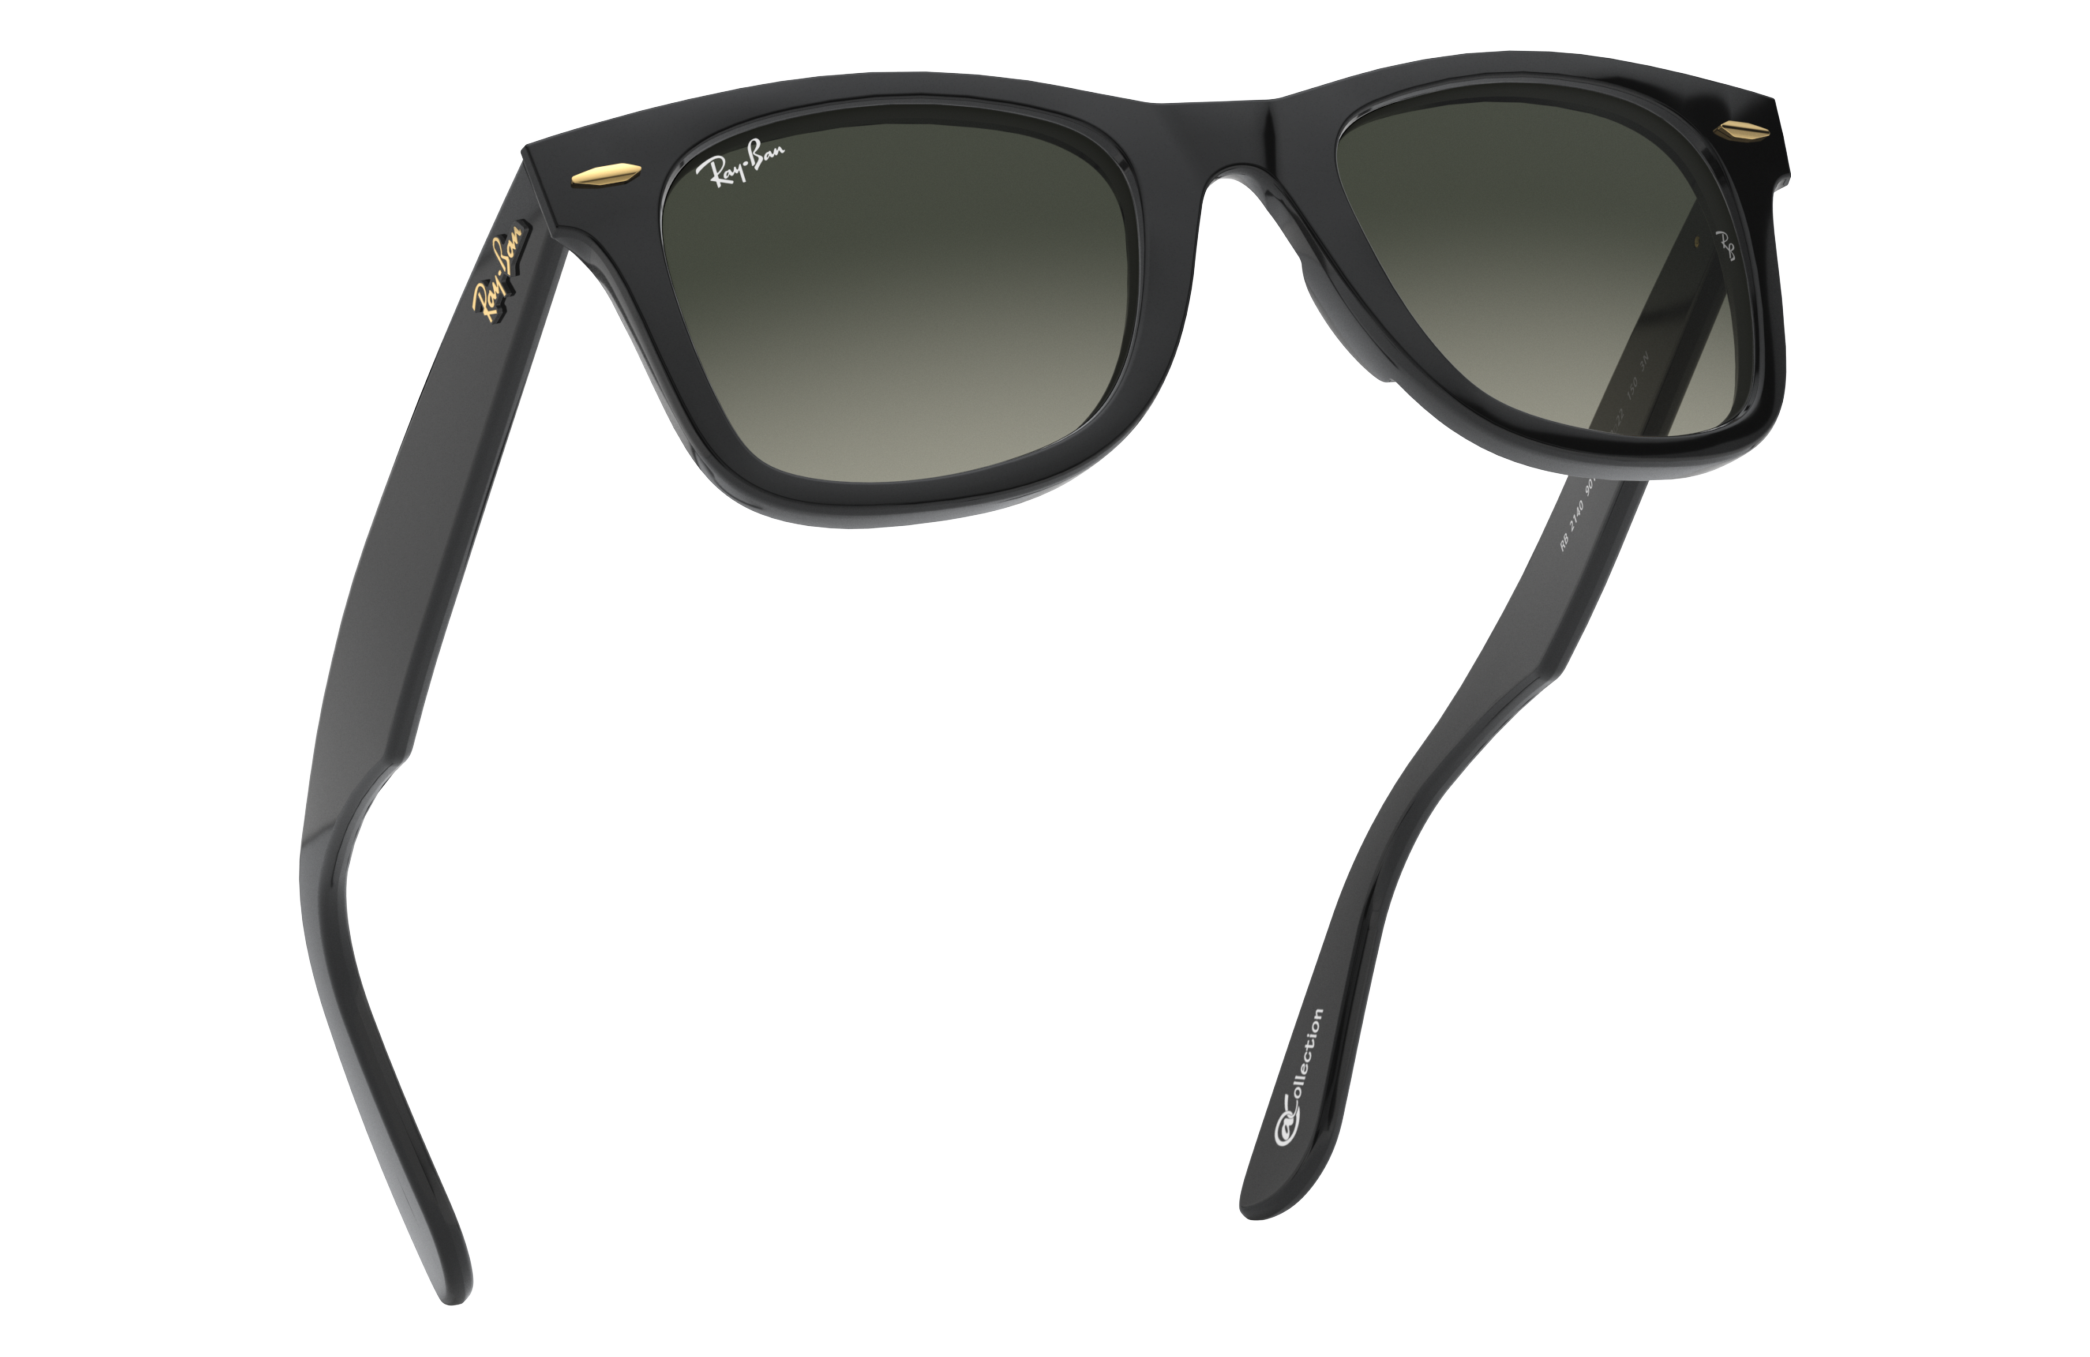 ORIGINAL WAYFARER @COLLECTION Sunglasses in Black and Grey - RB2140 |  Ray-Ban® US